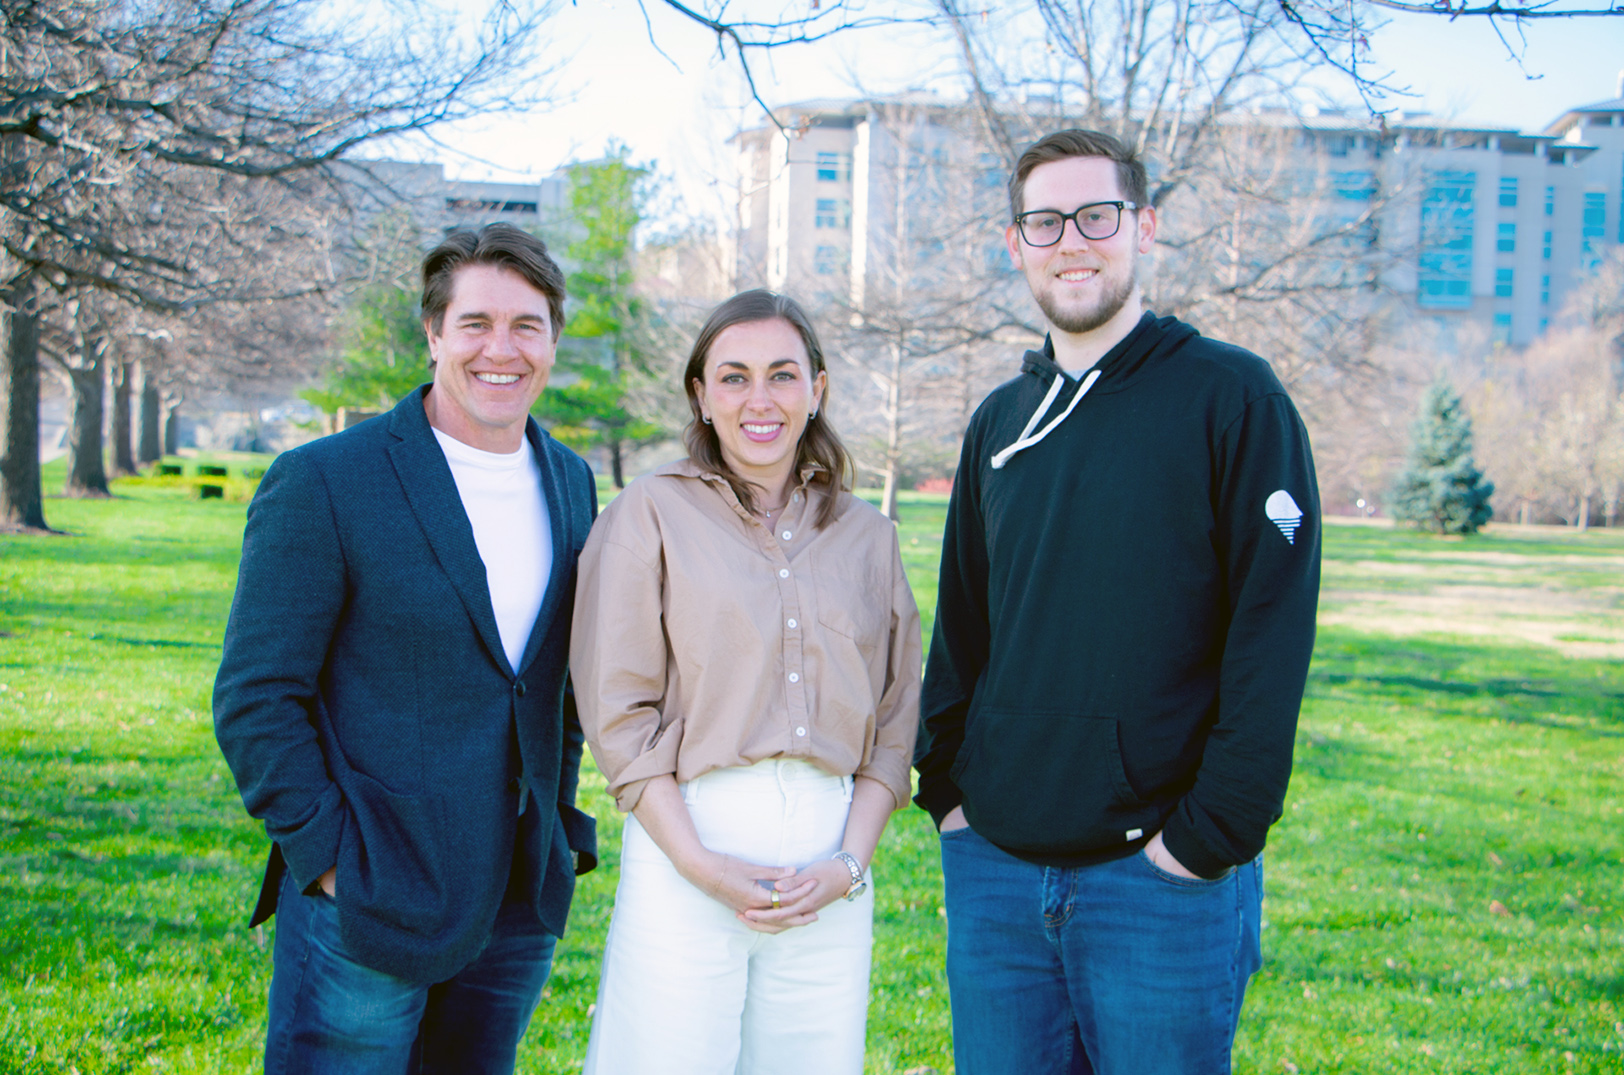 These founders just earned Digital Sandbox KC funds; next comes proving their concepts